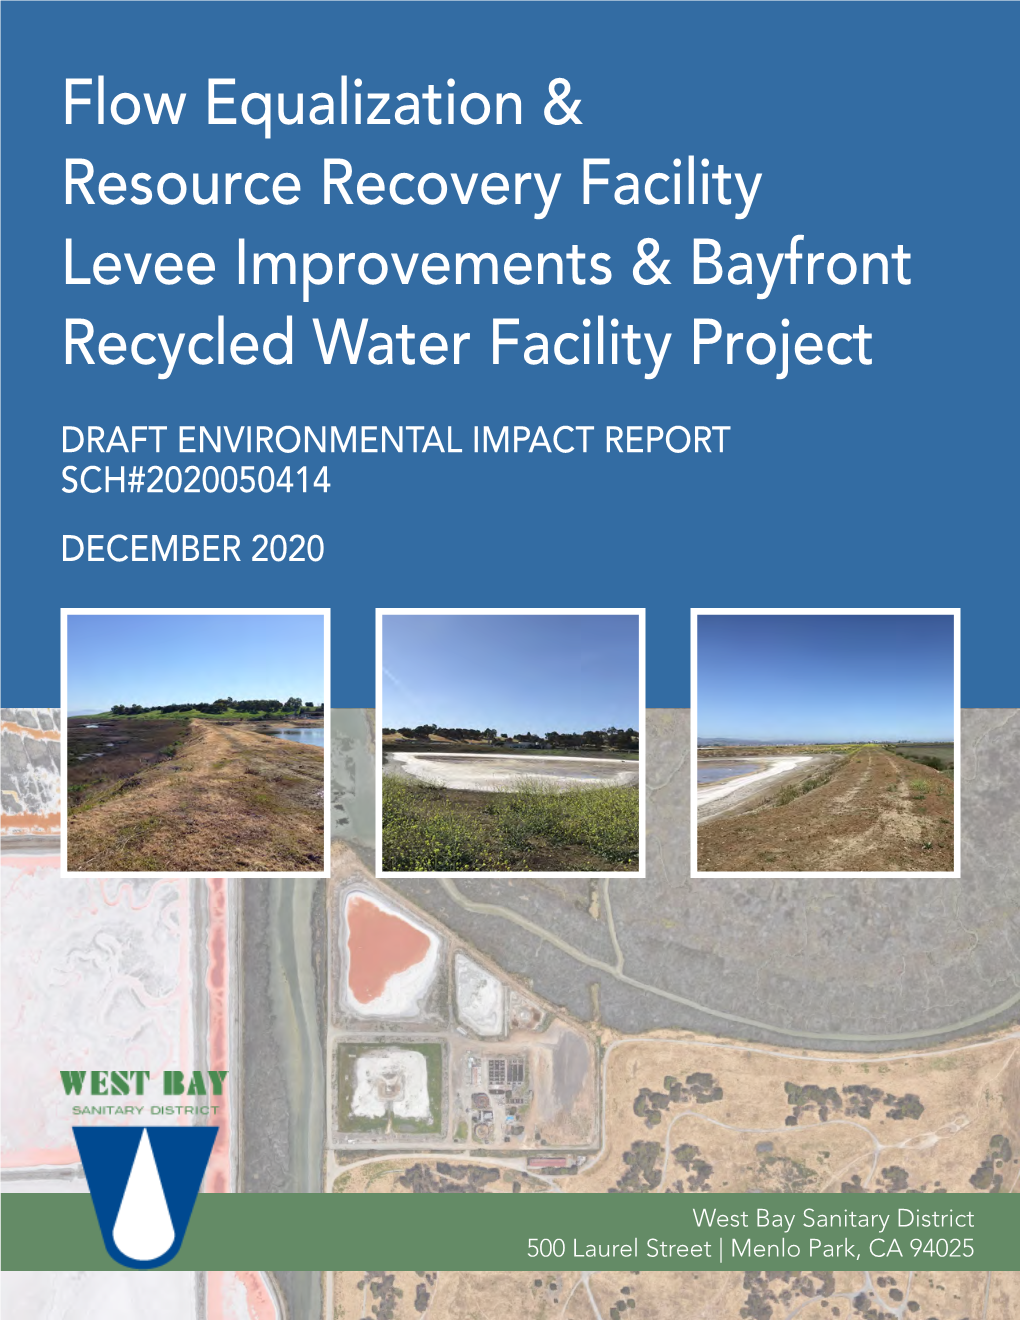 Flow Equalization & Resource Recovery Facility Levee